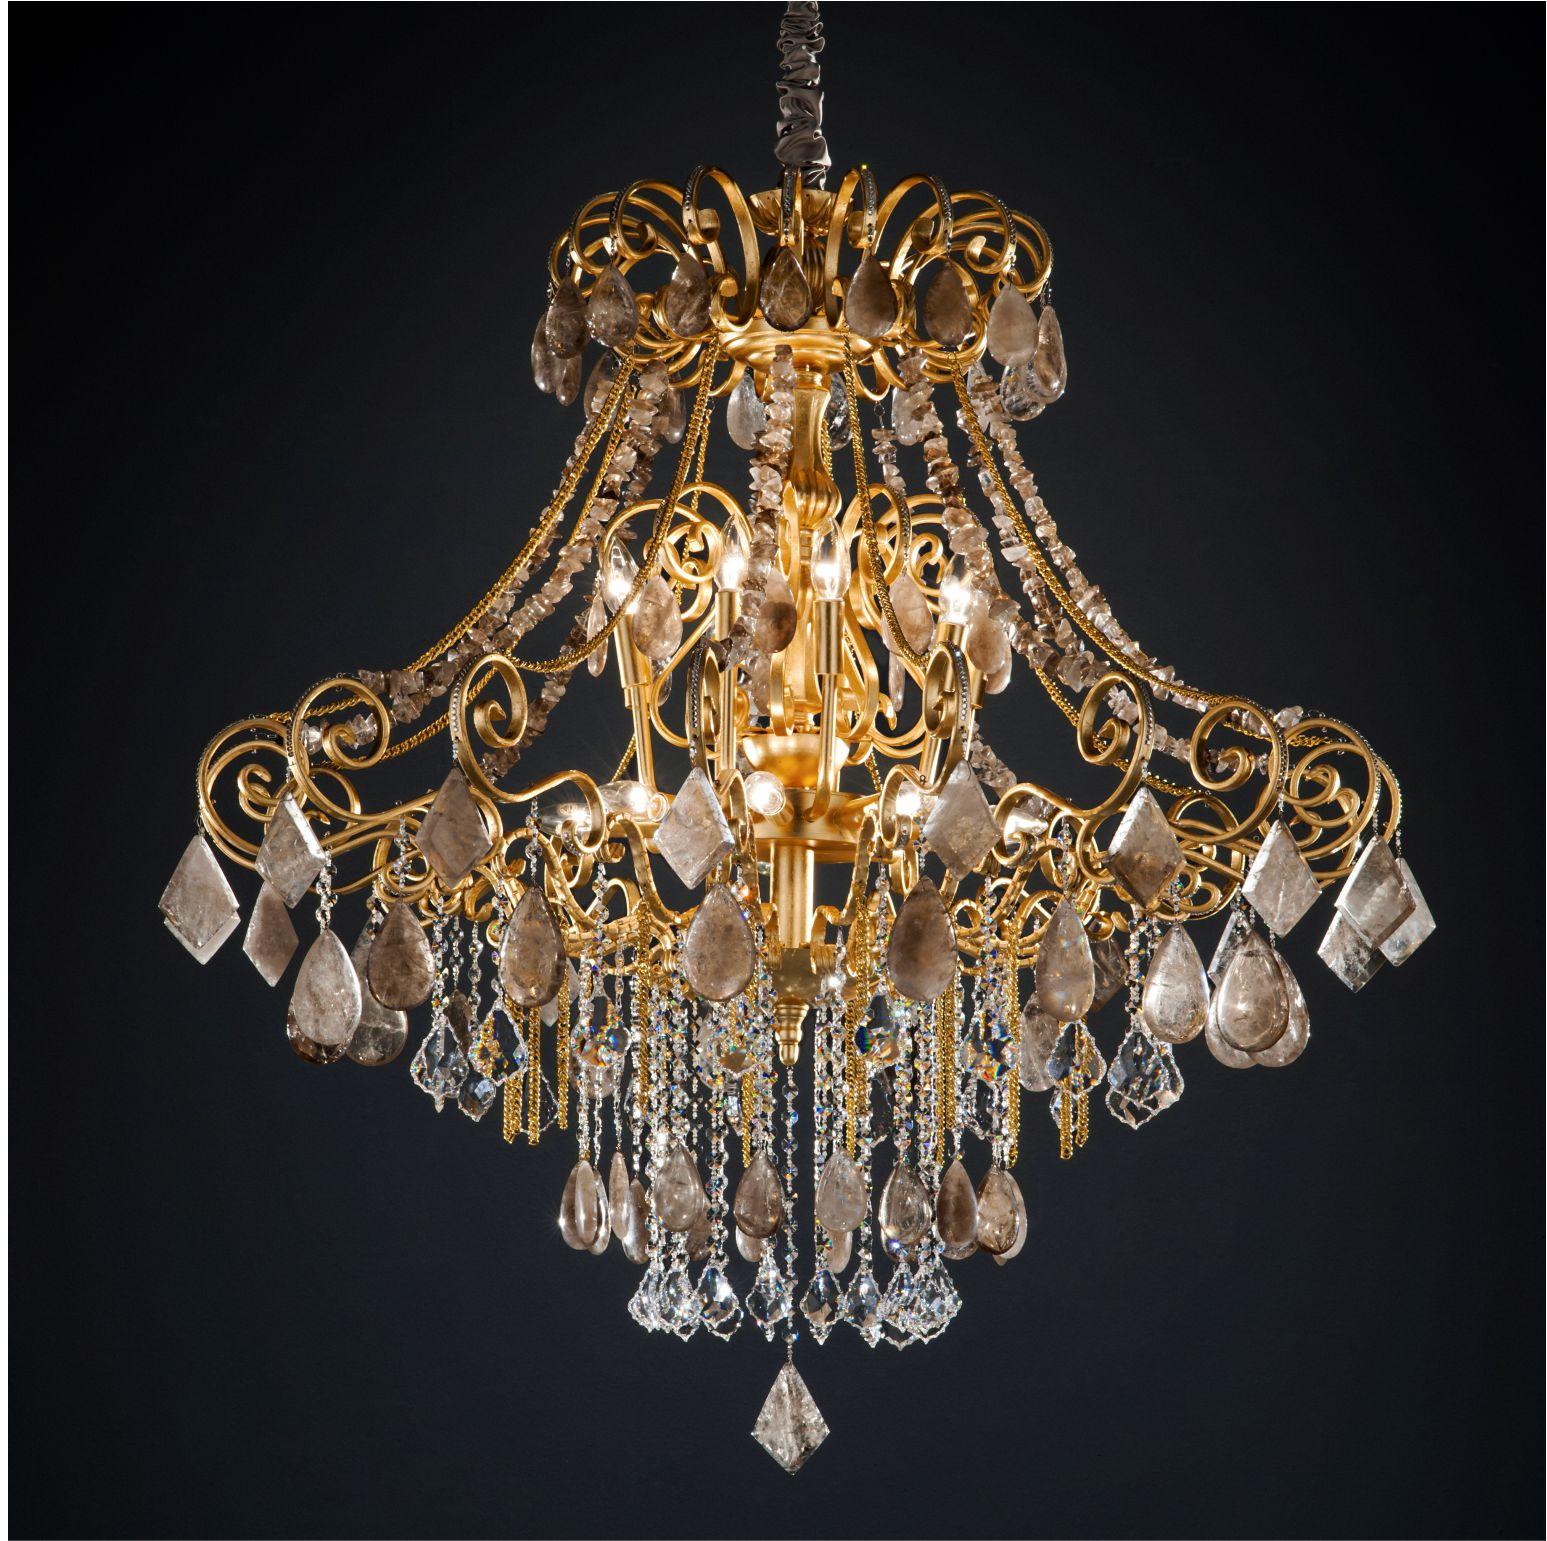 Quartz chandelier lamp by Aver
Dimensions: diameter 110 x H 115 cm. 
Materials: aluminum with gold leaf. Natural quartz crystals 
lighting: 18 x E 14.
Available in finishes: silver veneer, aged silver veneer, gold veneer, aged gold veneer, copper